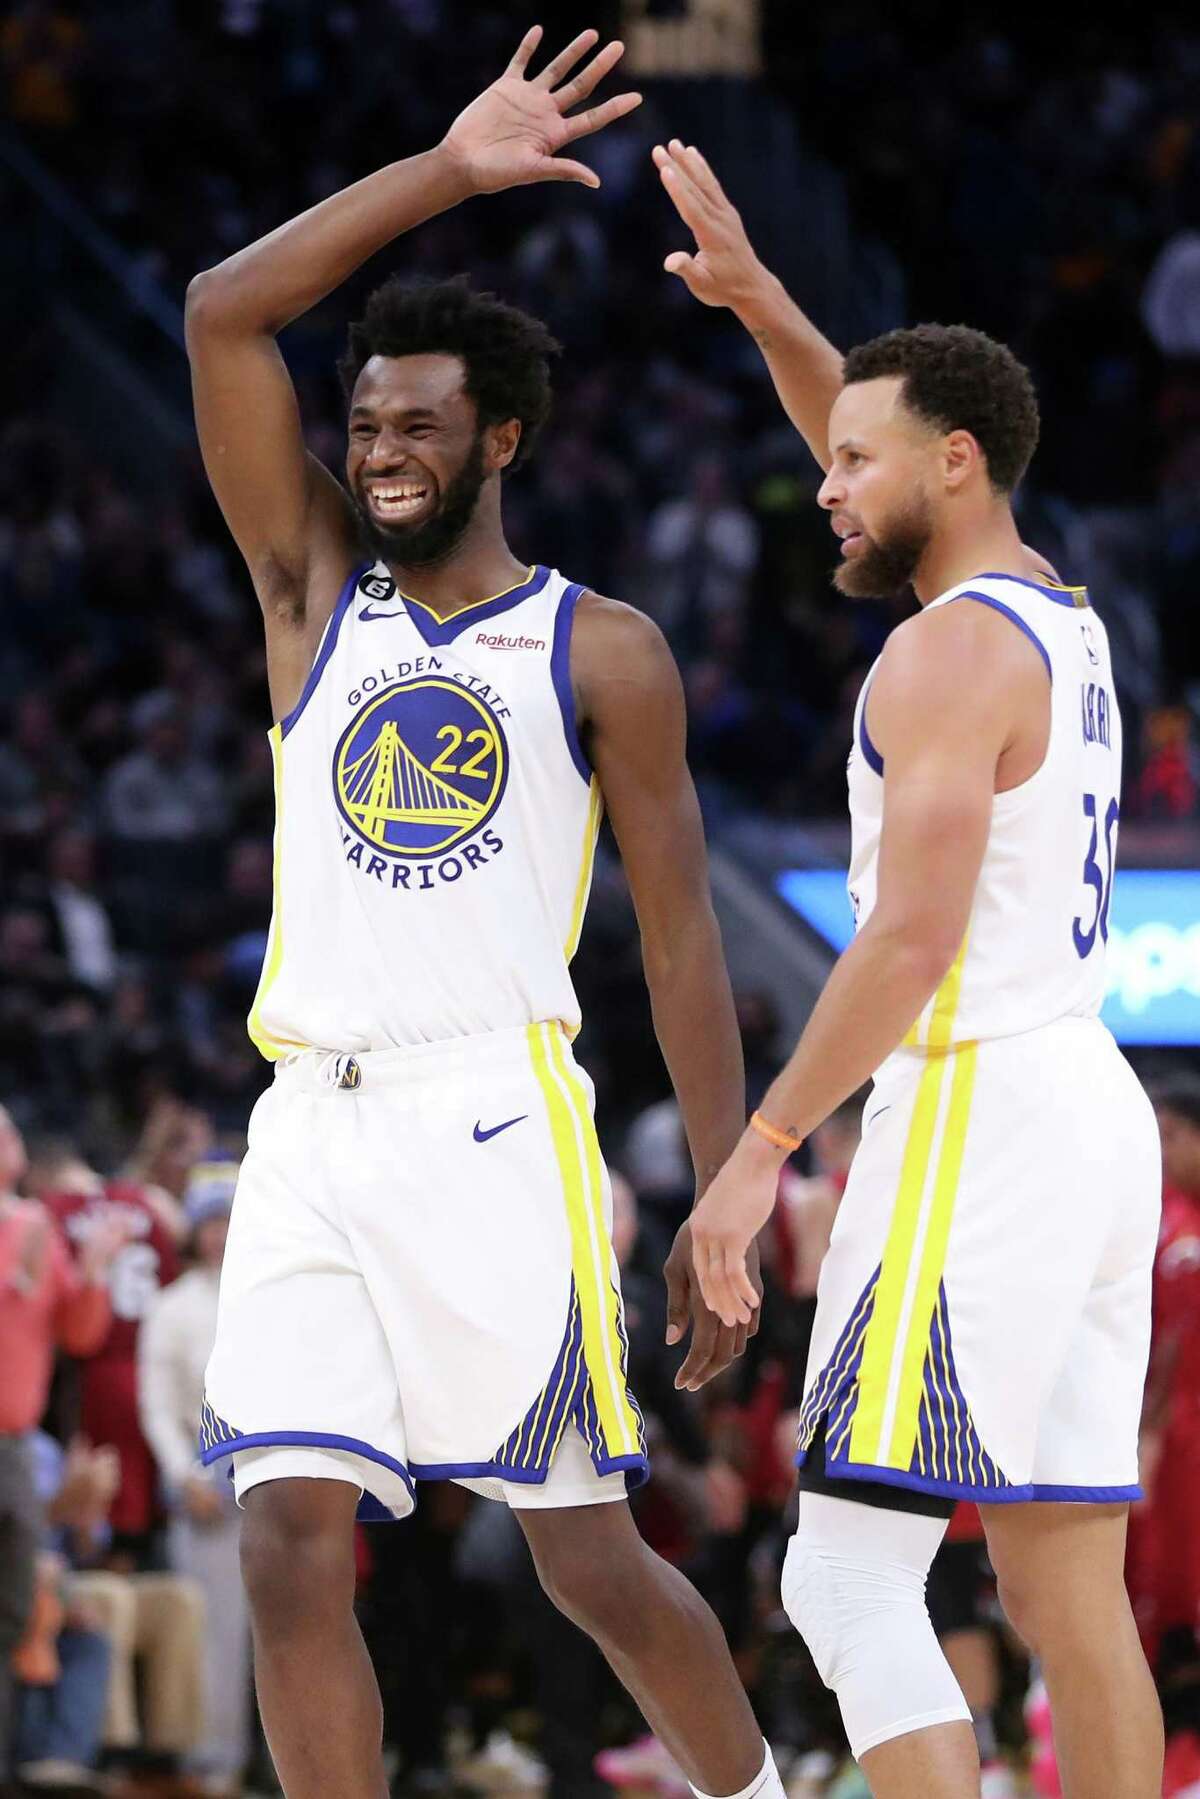 Golden State Warriors’ Andrew Wiggins and Stephen Curry celebrate a Curry 3-pointer in 4th quarter of Warriors’ 123-110 win over Miami Heat in NBA game at Chase Center in San Francisco, Calif., on Thursday, October 27, 2022.